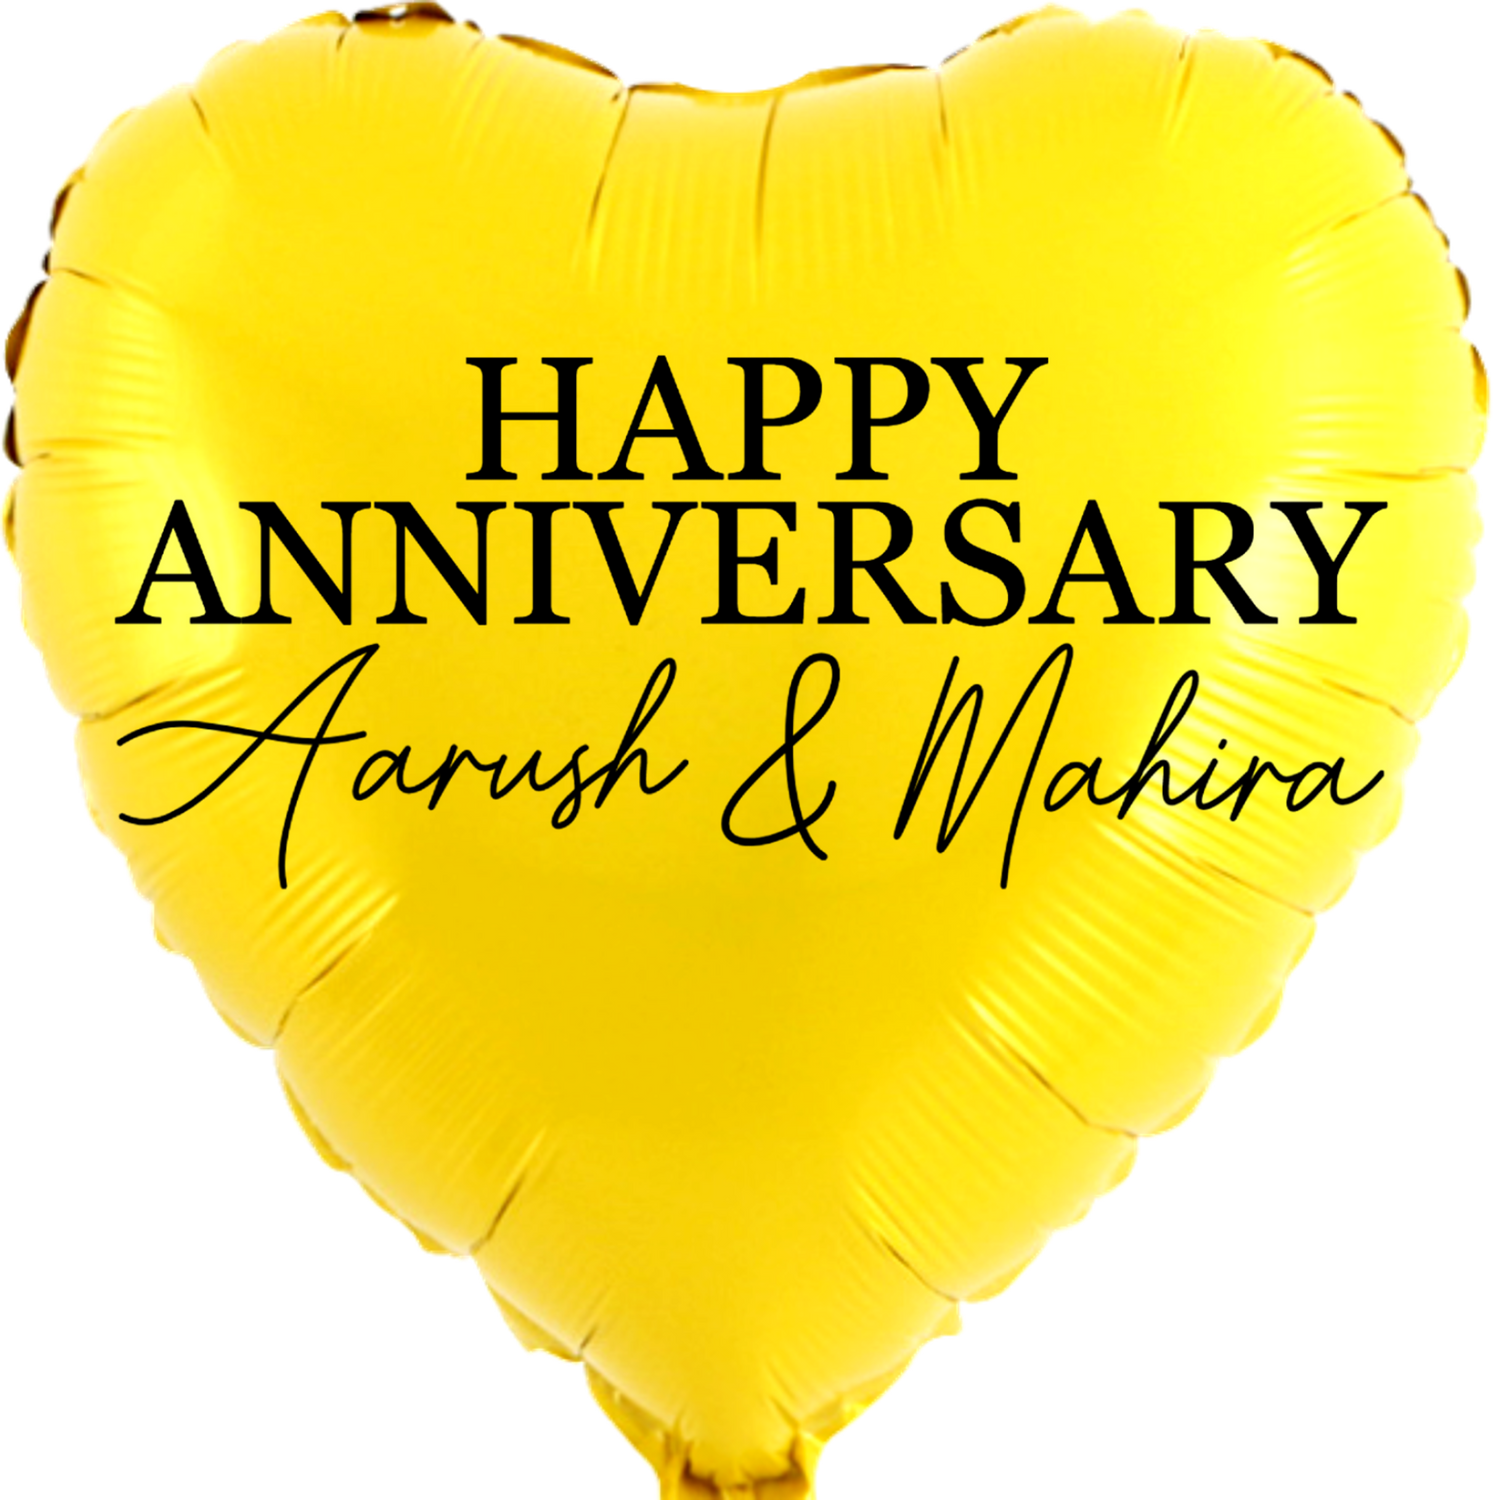 Custom Name/Text/Message Golden Heart Balloons For First Wedding Anniversary, 2nd/3rd/5th/10th/15th/20th/25th/30th/35th/40th/45th/50th/55th/60th/65th/75th Marriage Anniversary And Wedding Milestones. Supports Helium/Air, Luxury Bespoke Balloons Make Perfect Decoration Supplies & Surprise For Your Husband/Wife/Partner/Other-Half.